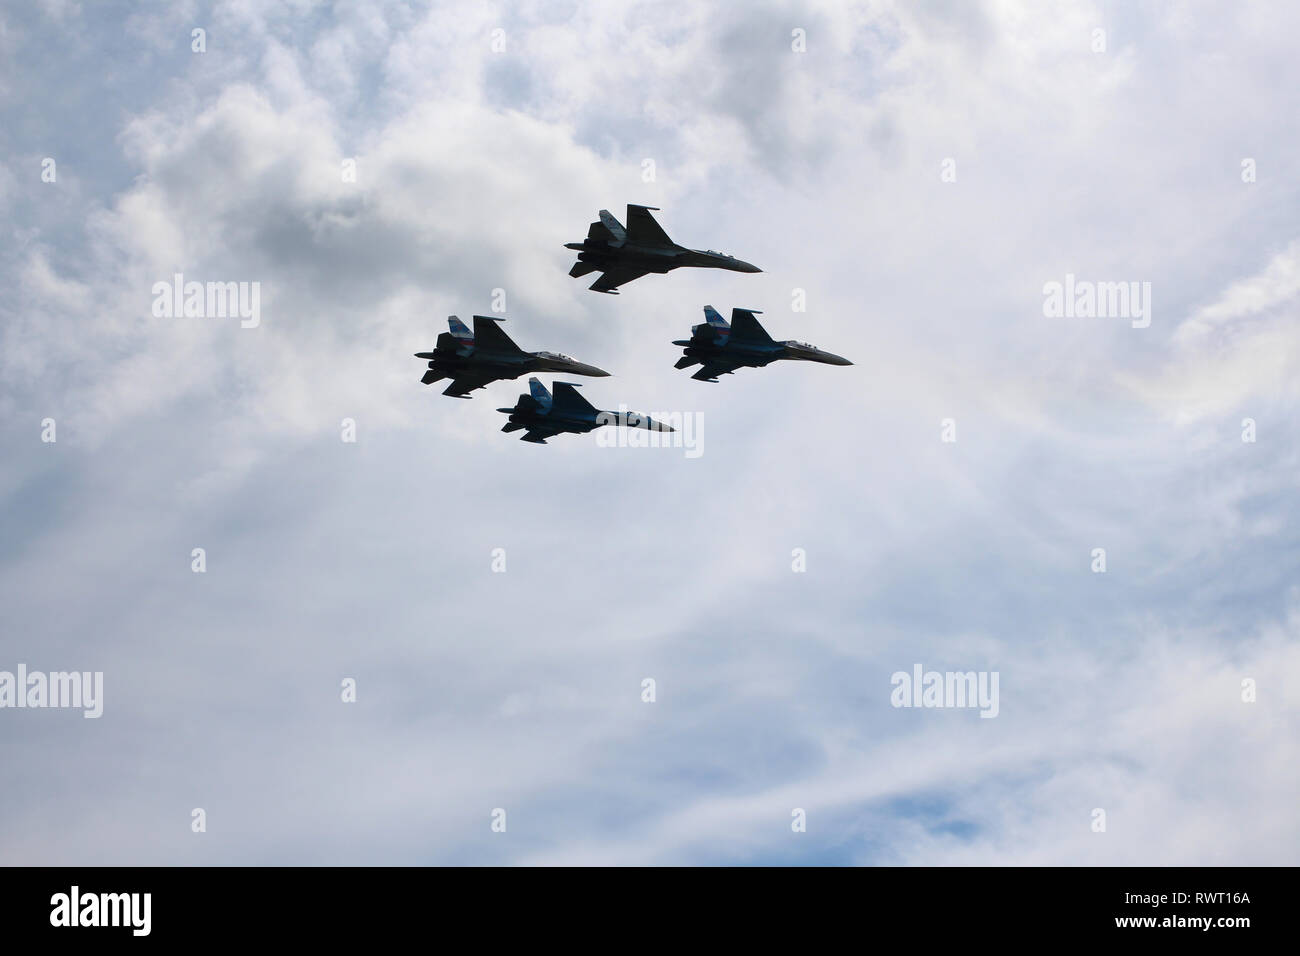 Four aircraft combat fighters SU-34 military fighters flying in the sky a great strong powerful Stock Photo